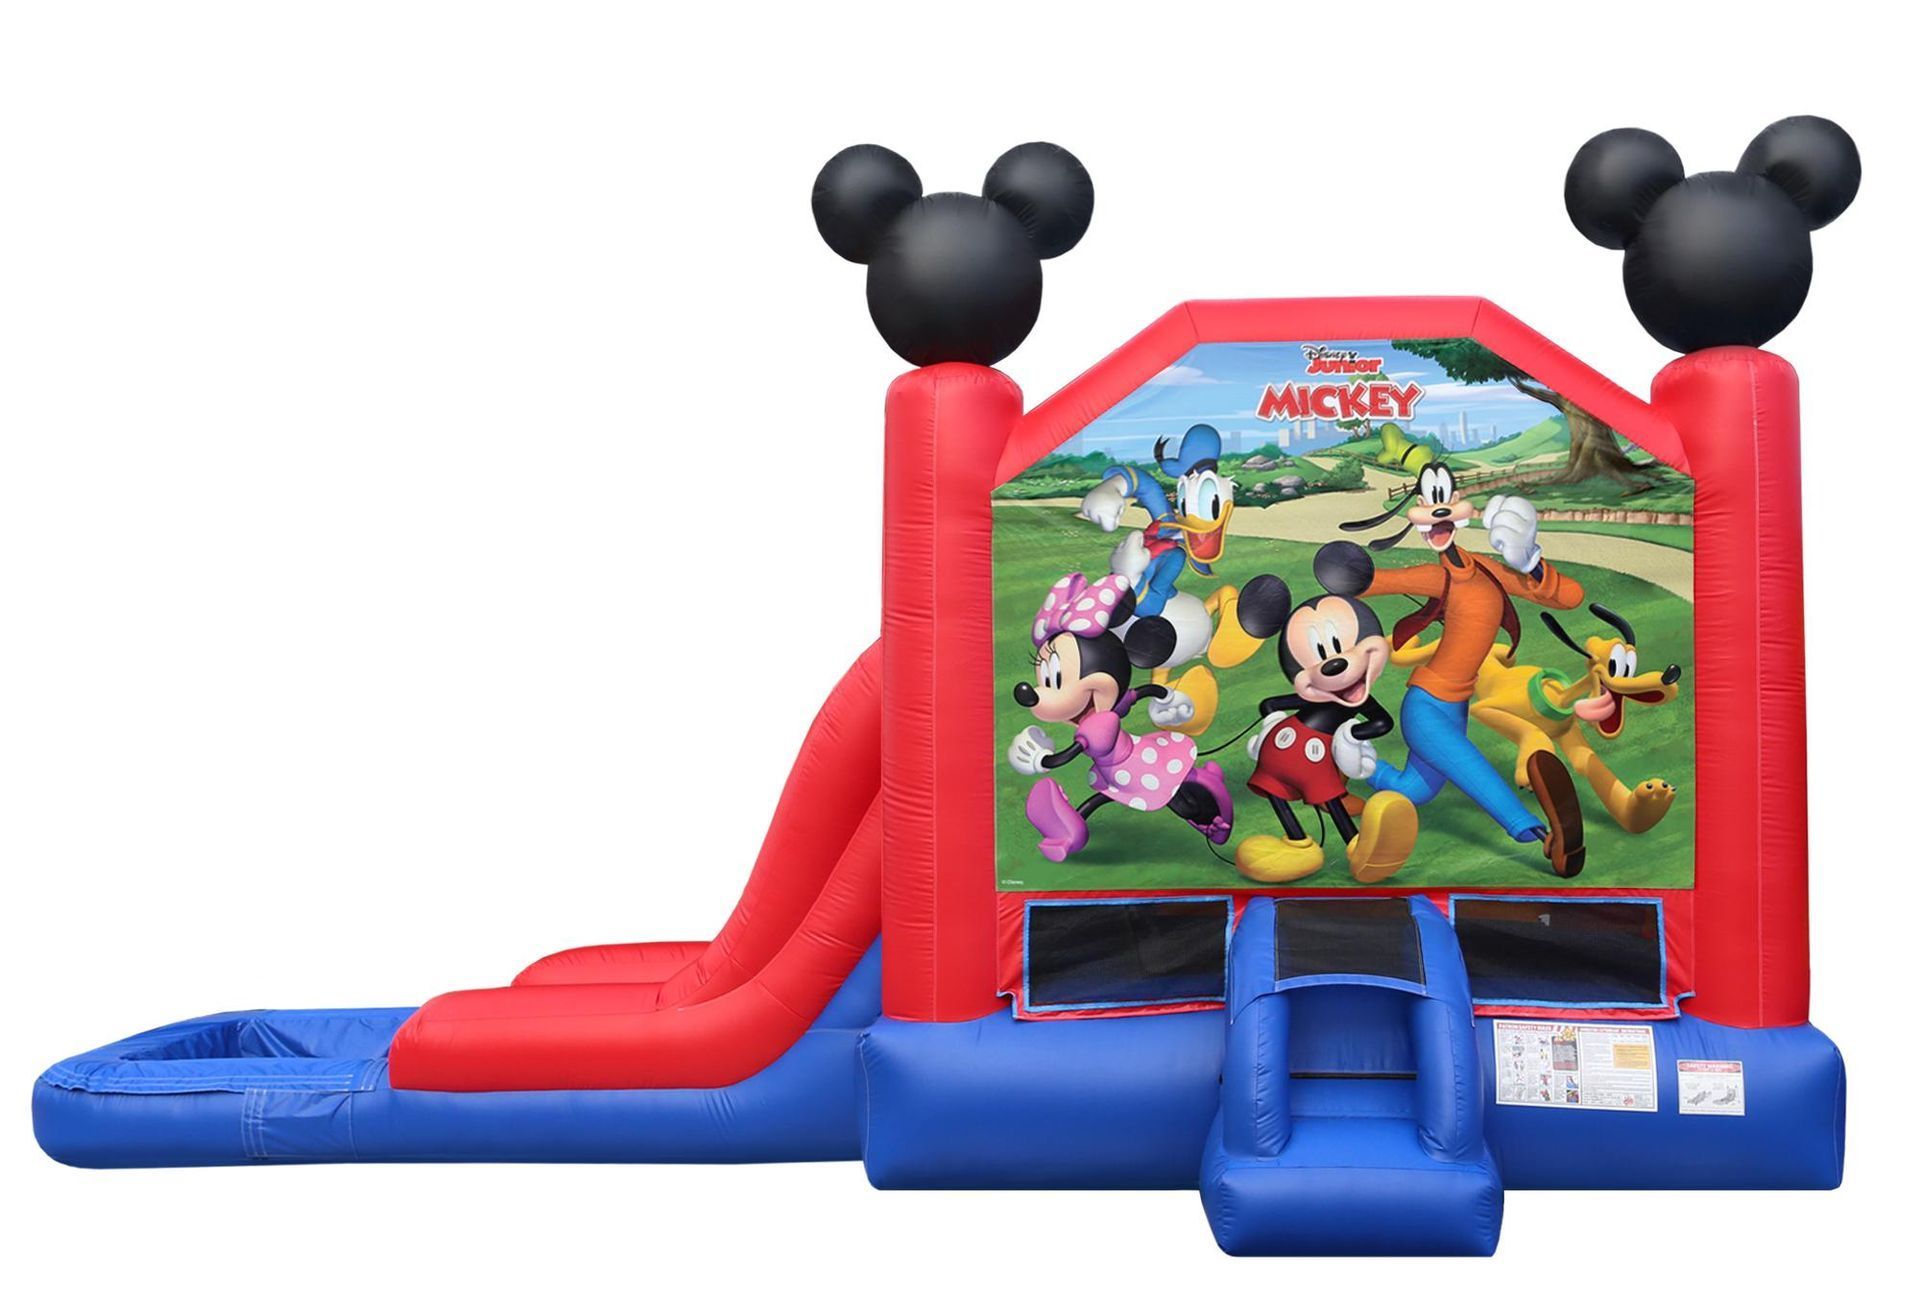 Mickey Mouse Bouncy House with a Slide Attached | Rancho Cucamonga, CA | Jam Jam House of Party Rentals